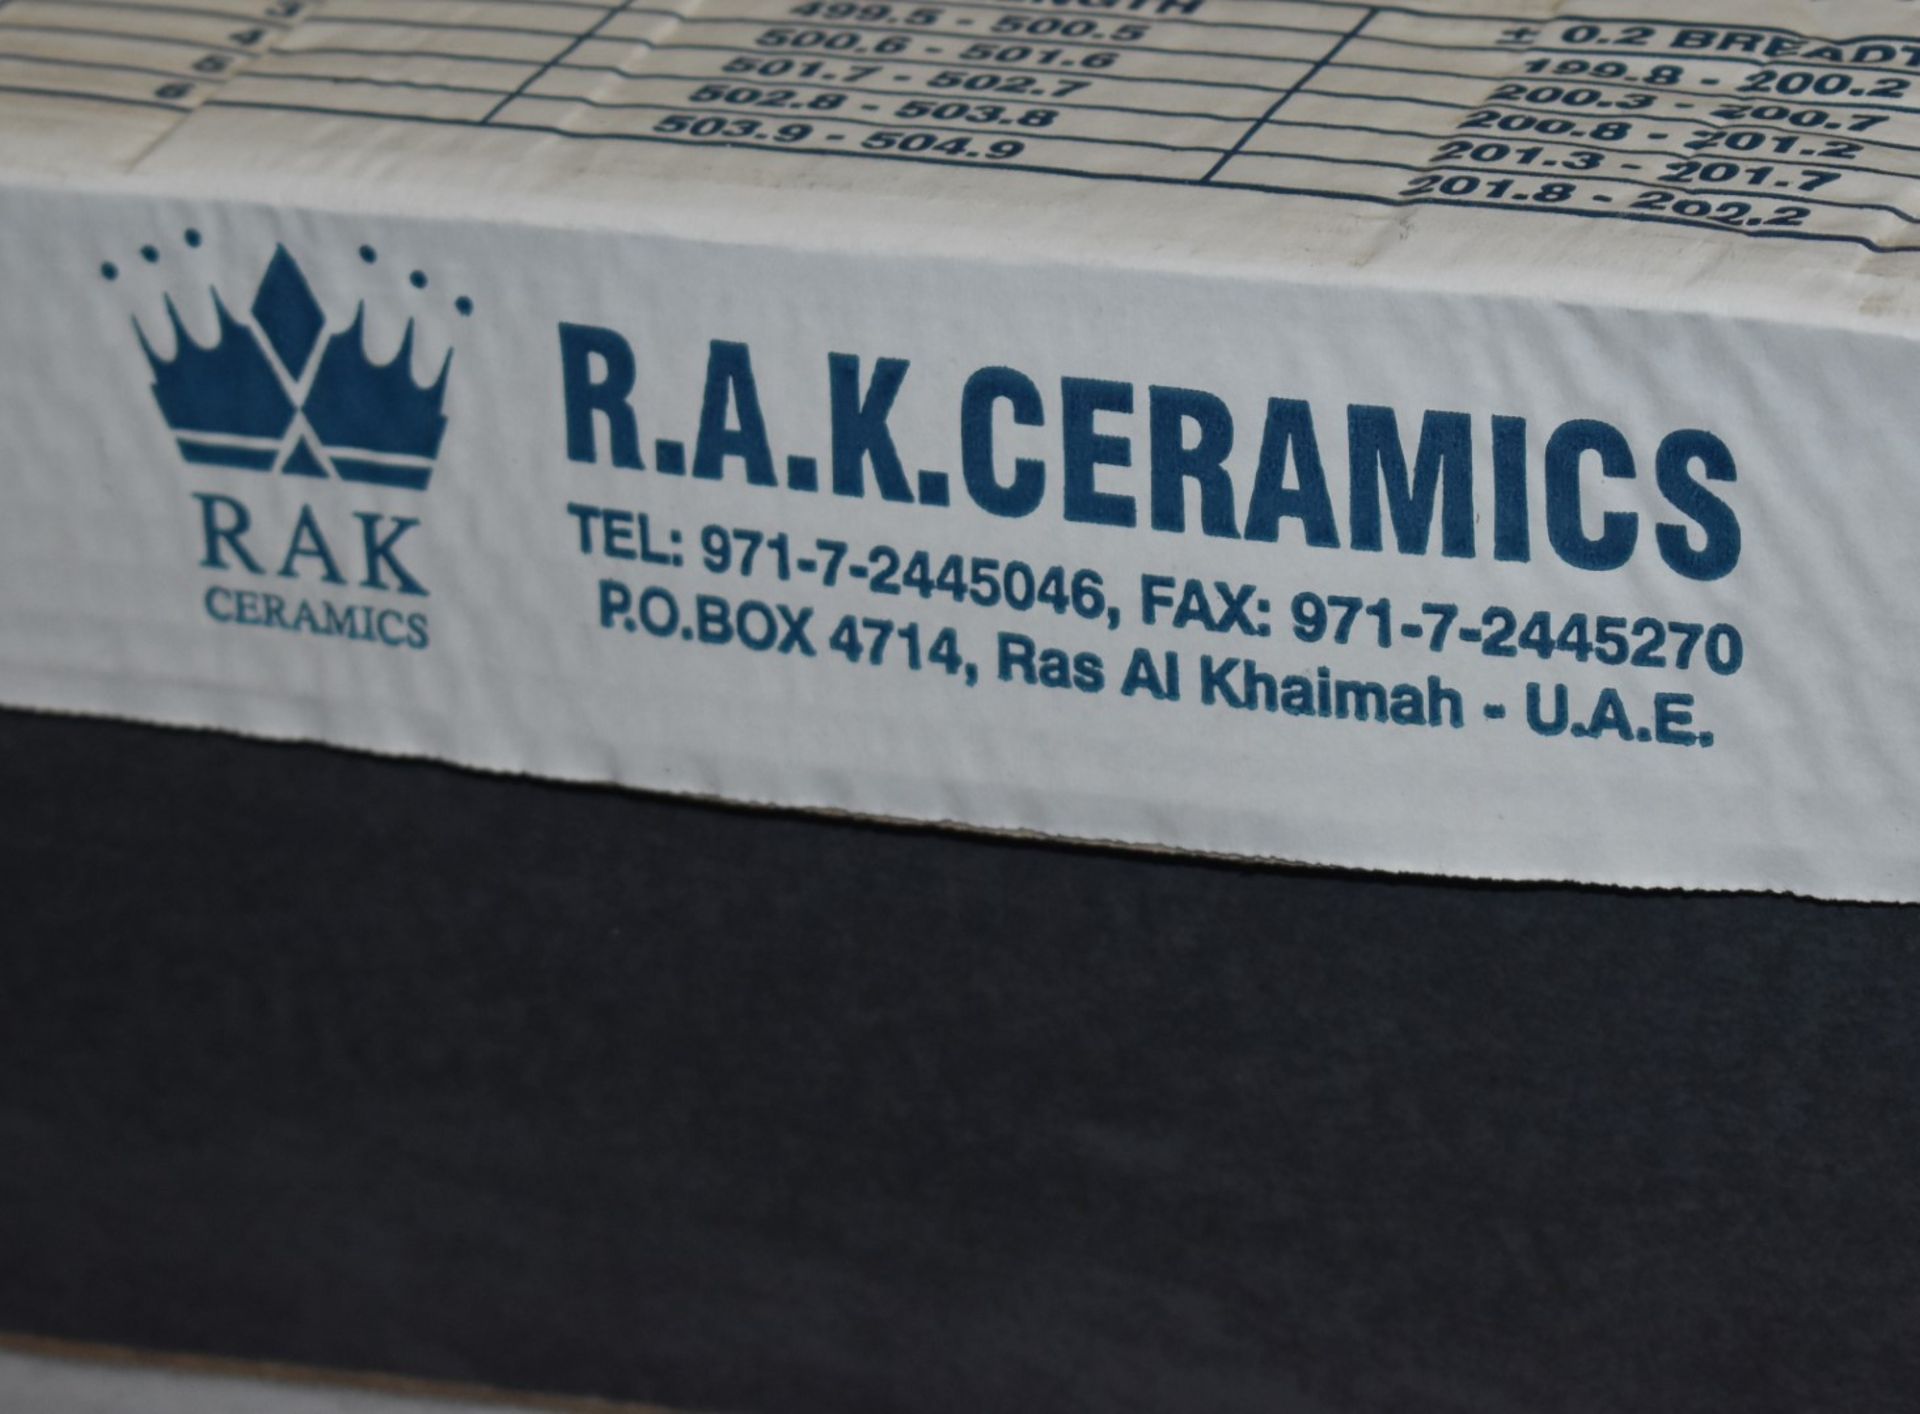 6 x Boxes of RAK Porcelain Floor or Wall Tiles - Dolomit Black - 20 x 50 cm Tiles Covering a Total - Image 7 of 9